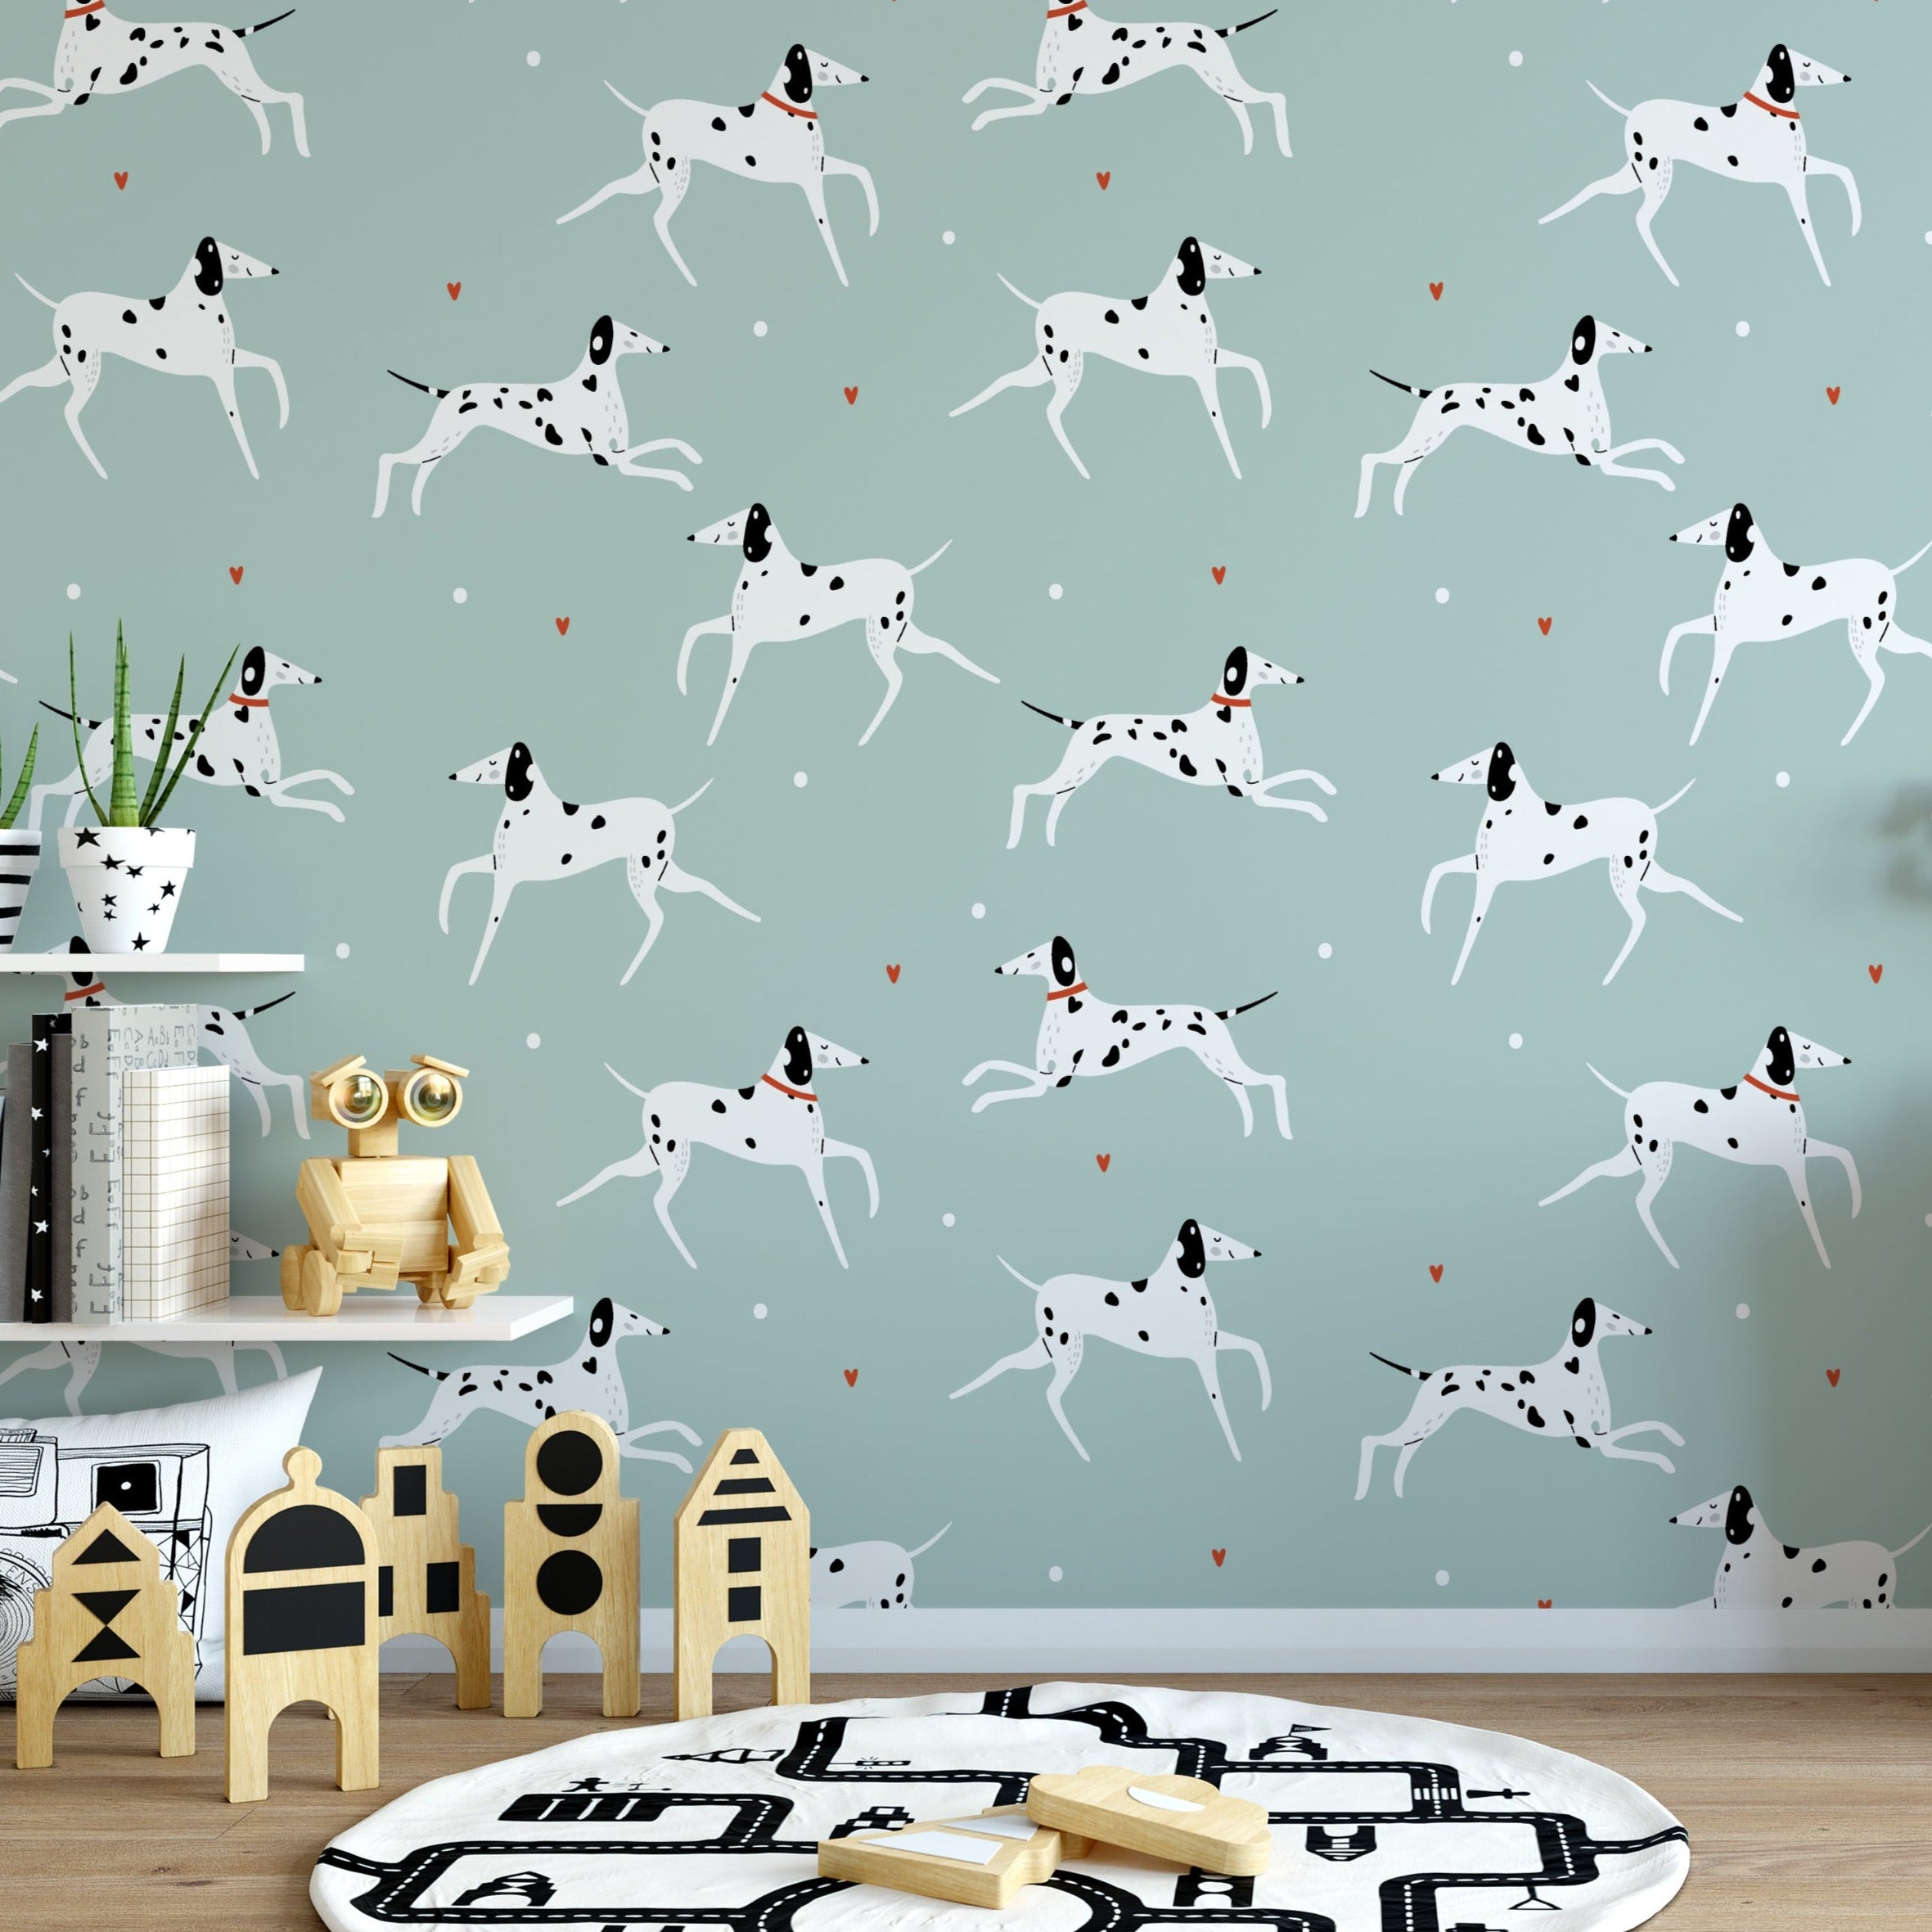 Children's play area decorated with 'Let's Pawty! Kids Wallpaper', showcasing animated white Dalmatian dogs with black spots, frolicking across a mint green backdrop. The room includes wooden children’s toys and a plush seating area, creating a lively and engaging environment